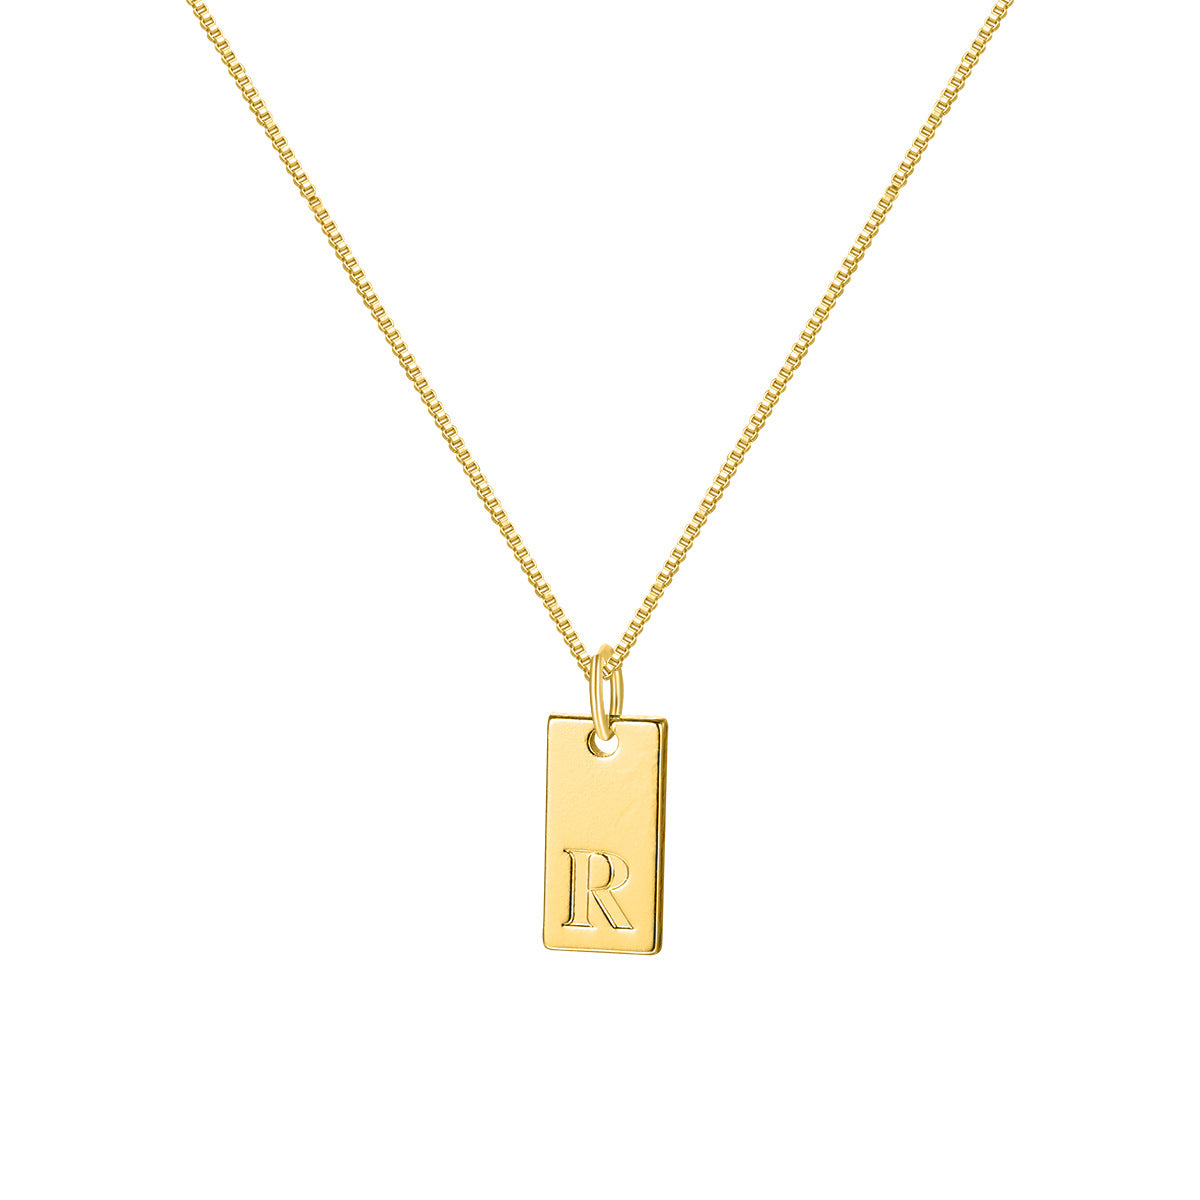 26 English Letter Necklace Creative: Personalized Style at Its Finest